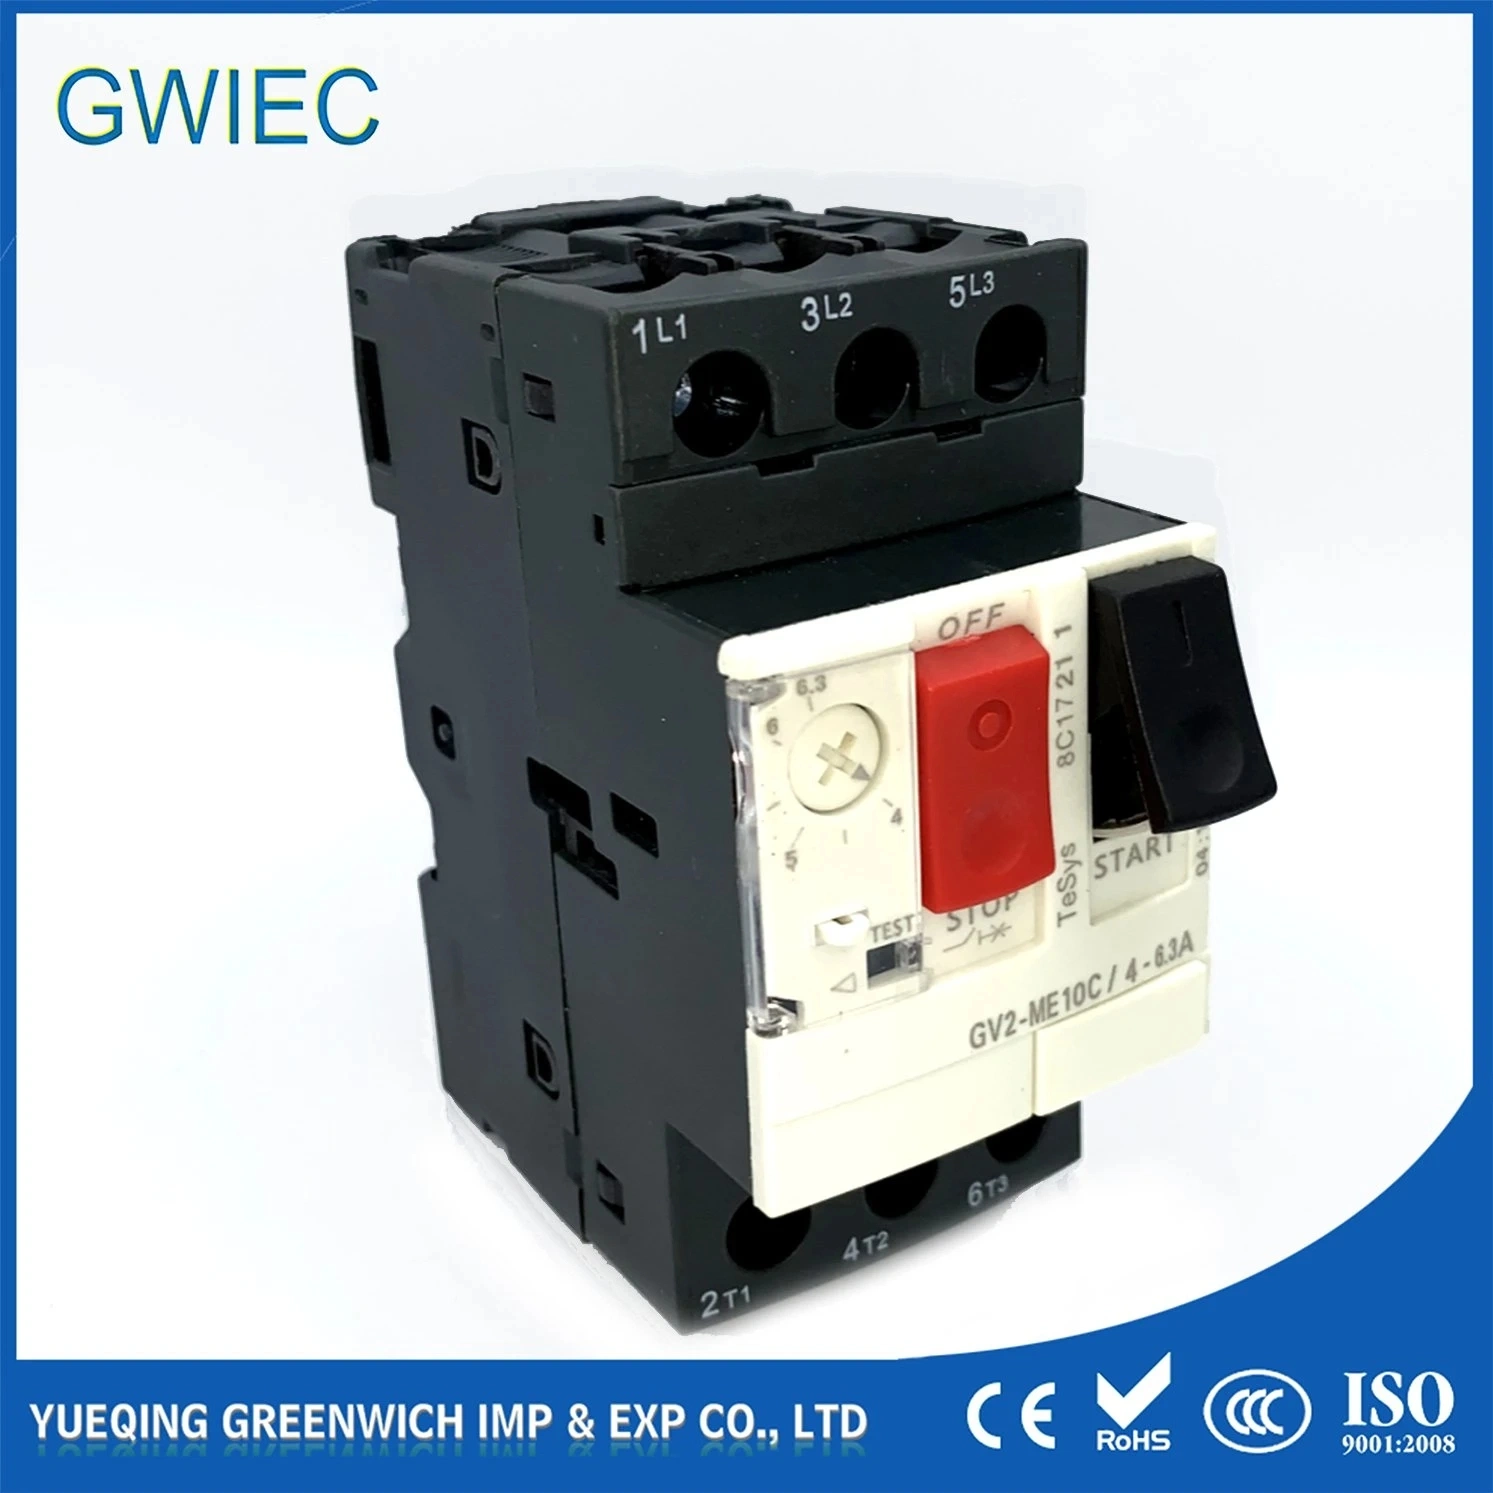 25.0-40.0 0.25-0.4 Breaker Overcurrent Overload Protection Motor Circuit Protector with Factory Price